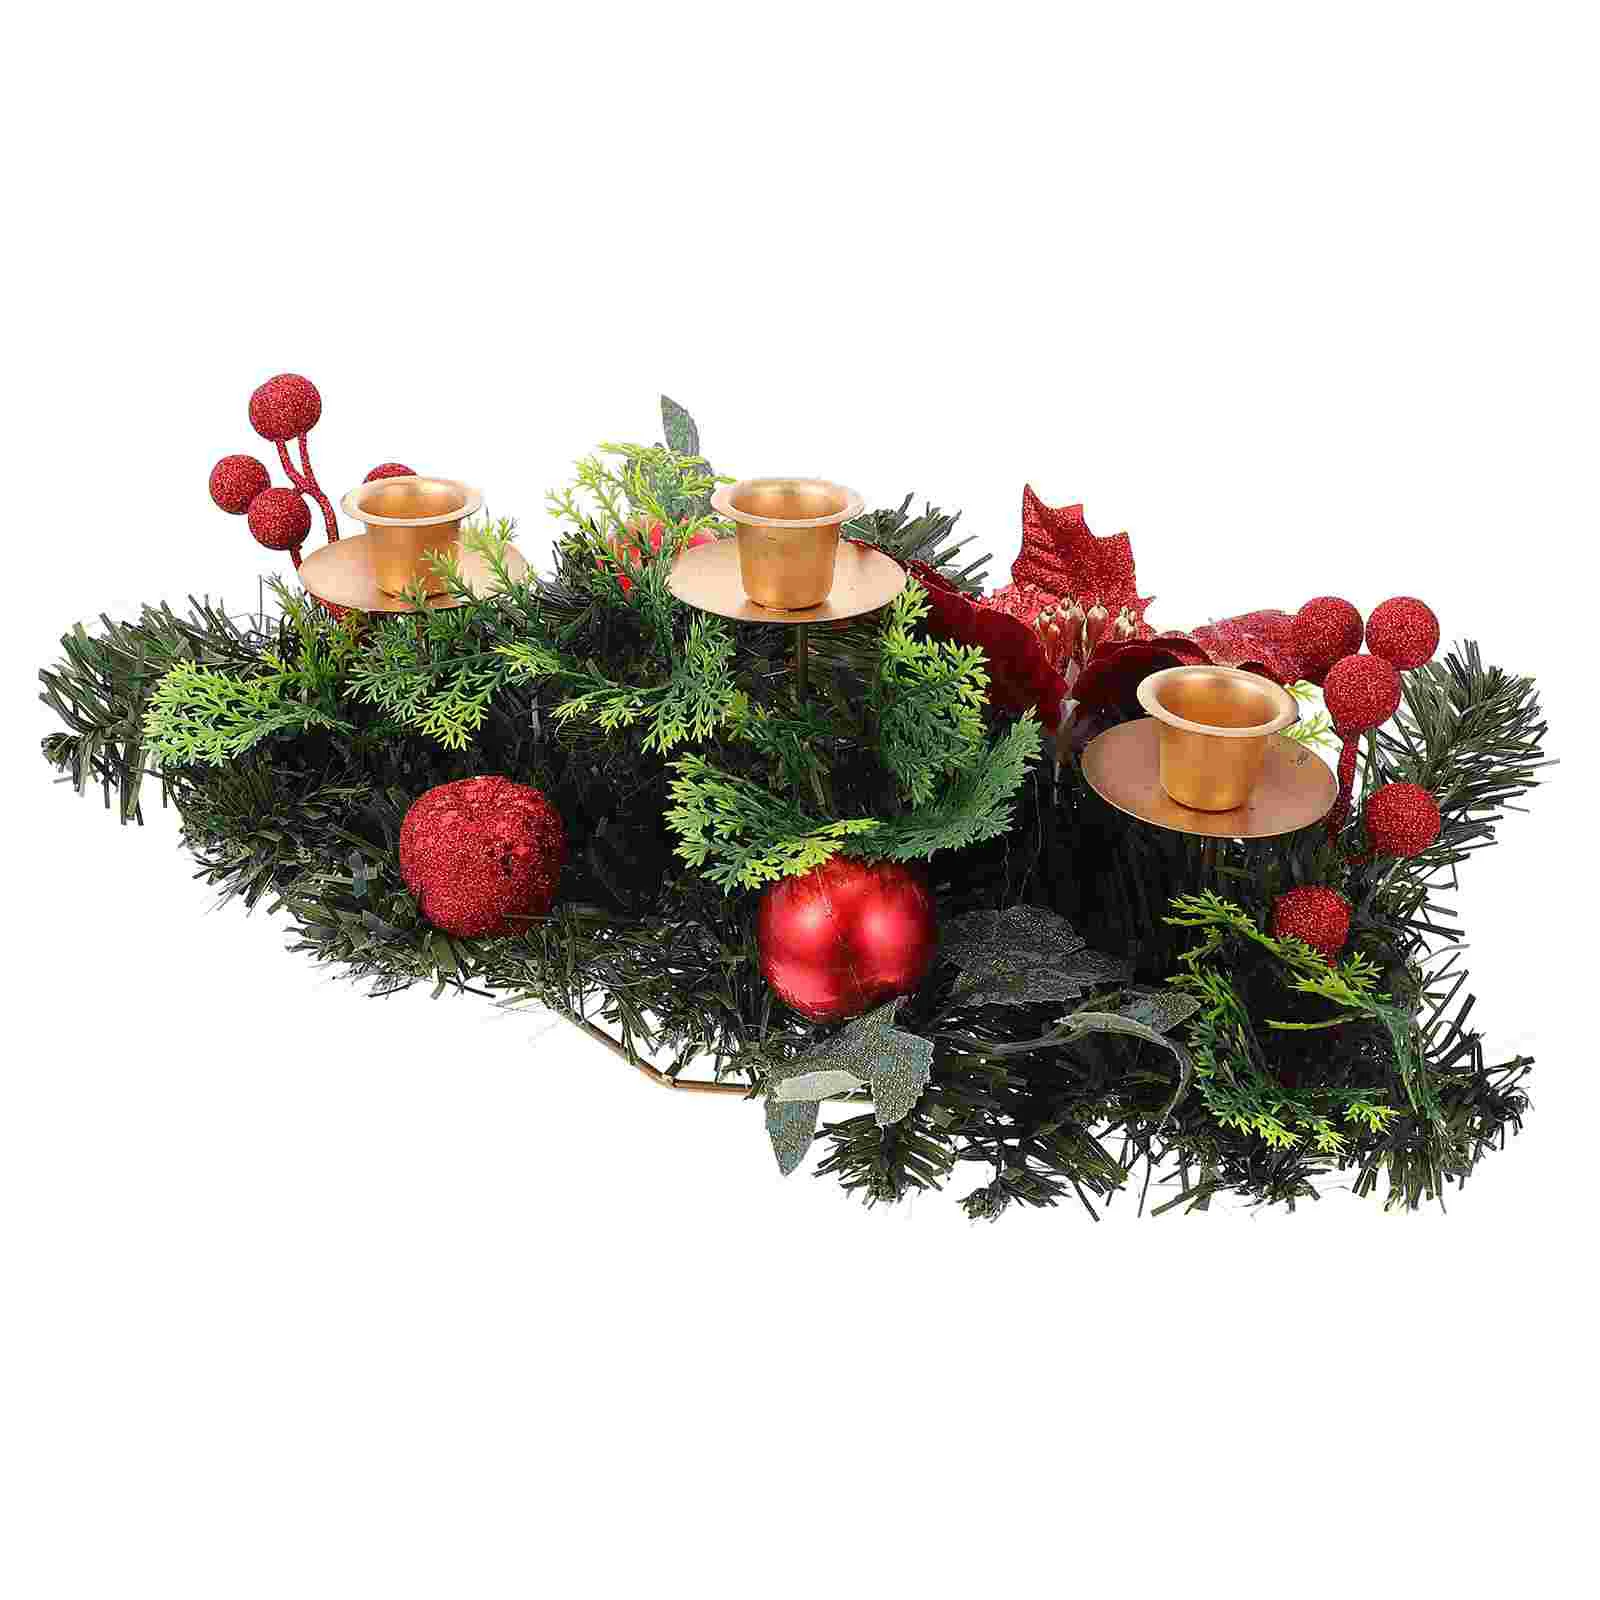 

Christmas Mini Wreath Xmas Wreaths Holder Stand Rings Holiday Ring Candleholder Pretty Iron Rustic Candlestick Tea Light Advent